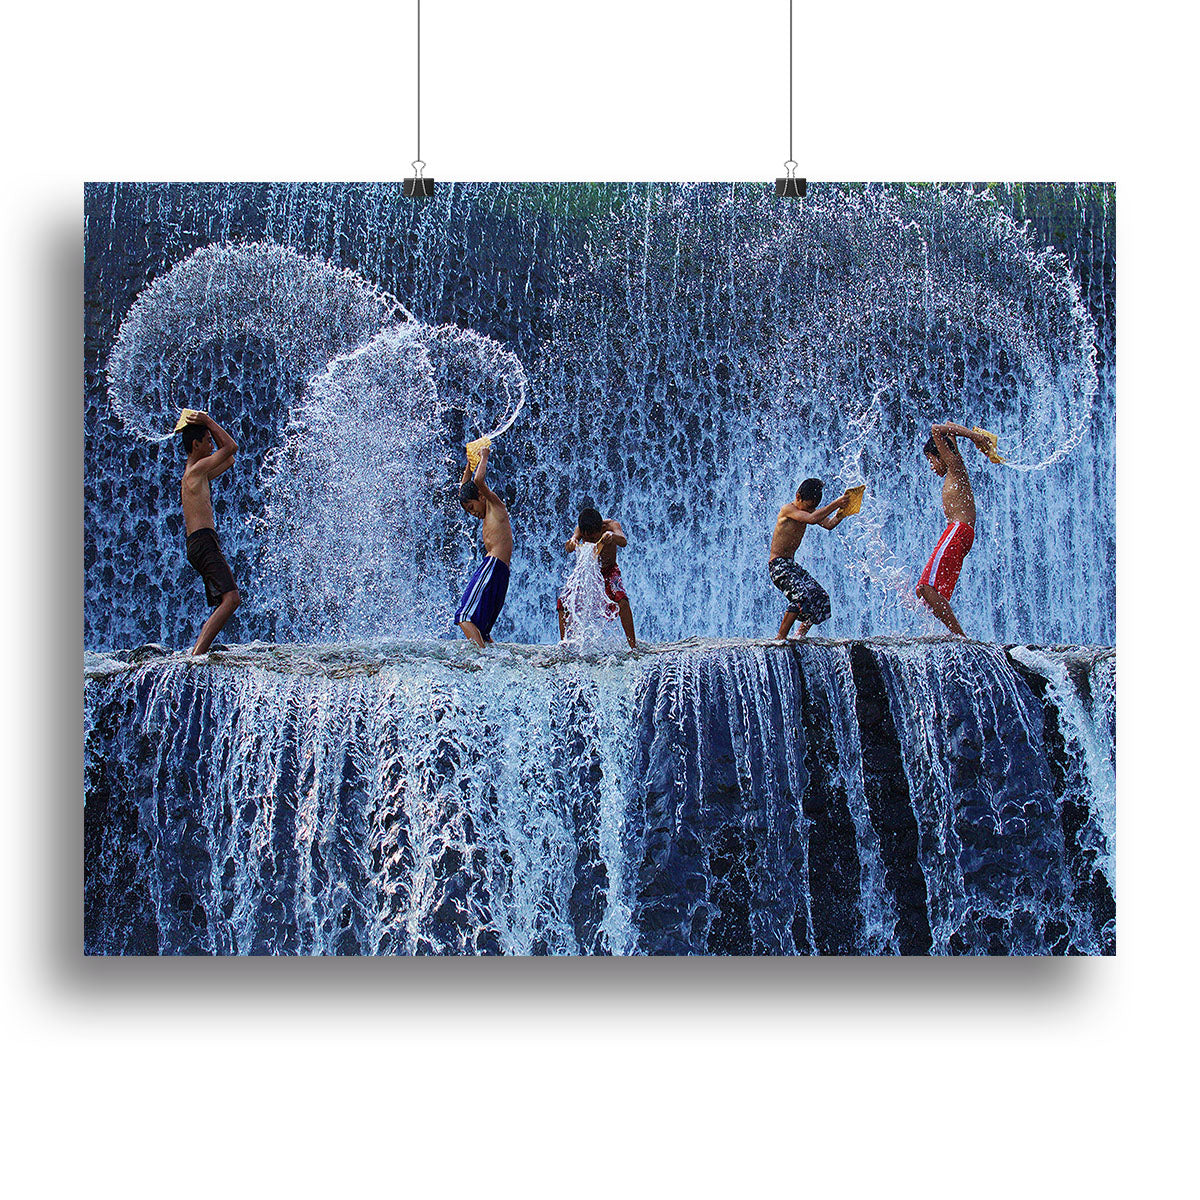 Playing with splash Canvas Print or Poster - 1x - 2